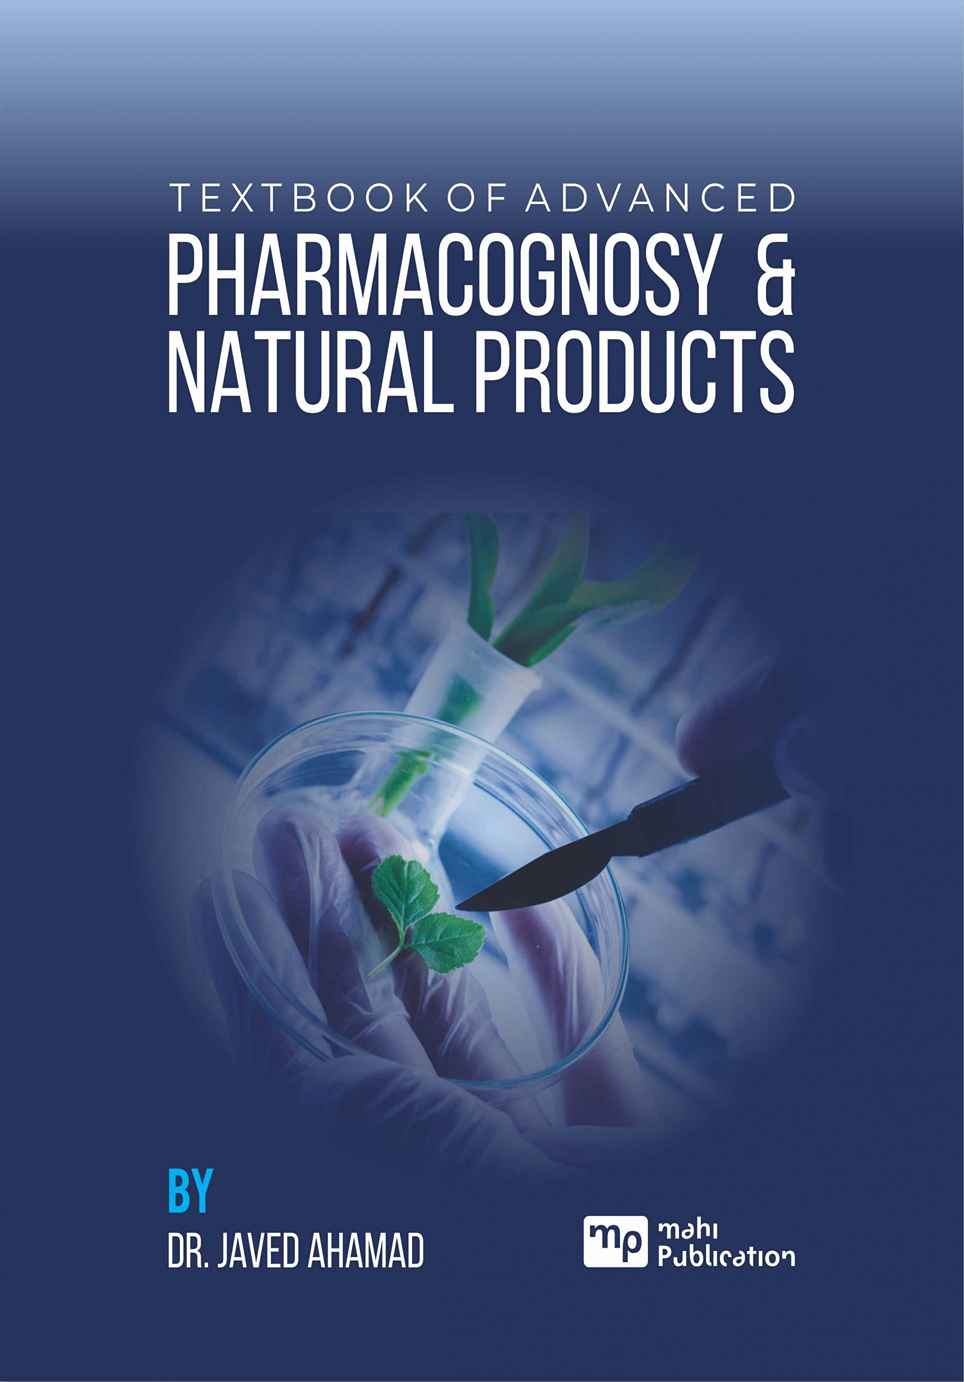 Textbook of Advanced Pharmacognosy & Natural Products